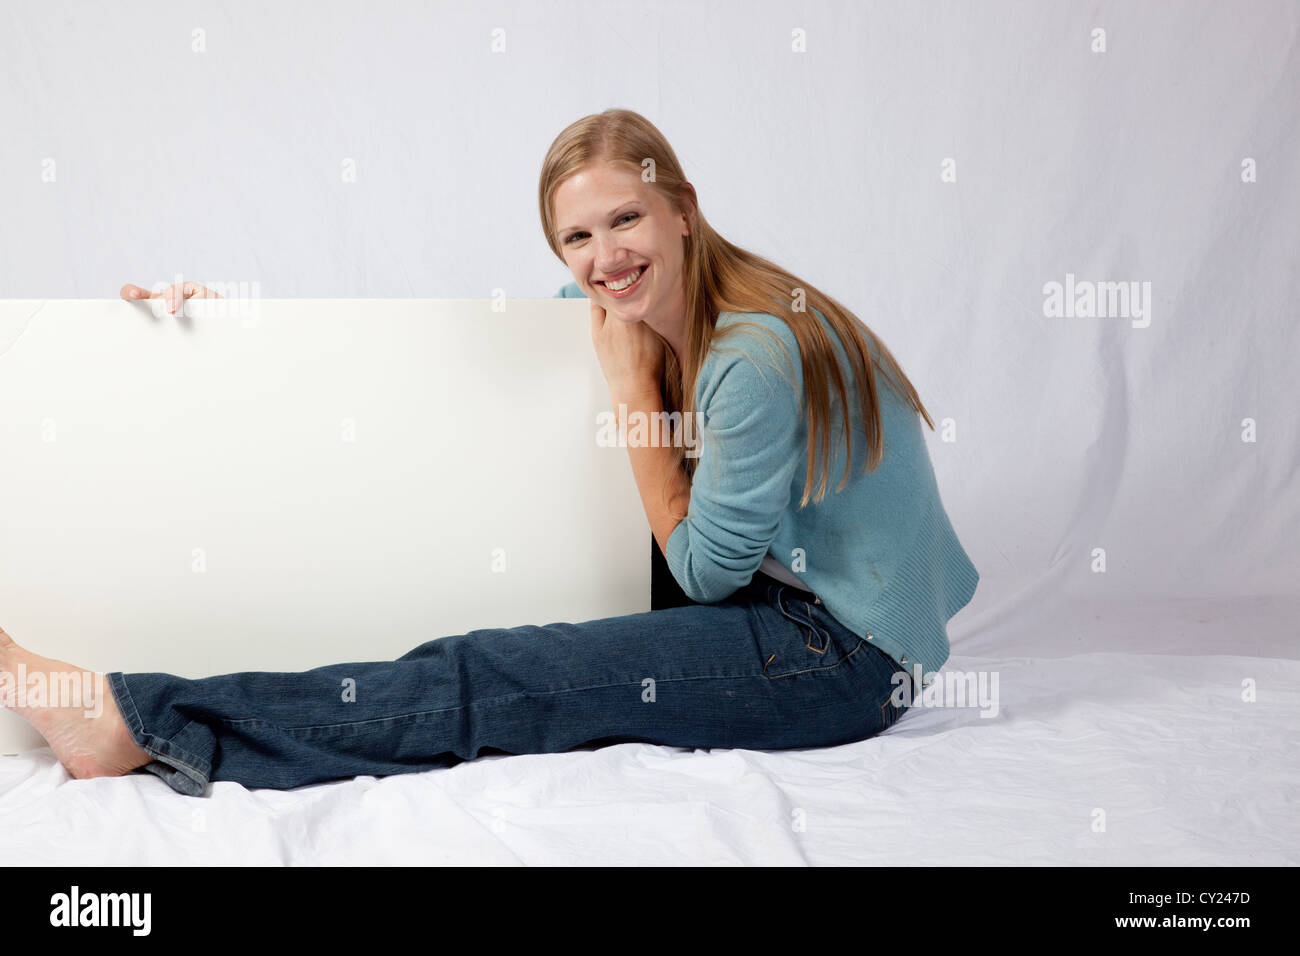 Pretty blond woman sitting and holding a white sign that is blank, ready for you to write your message on. Stock Photo